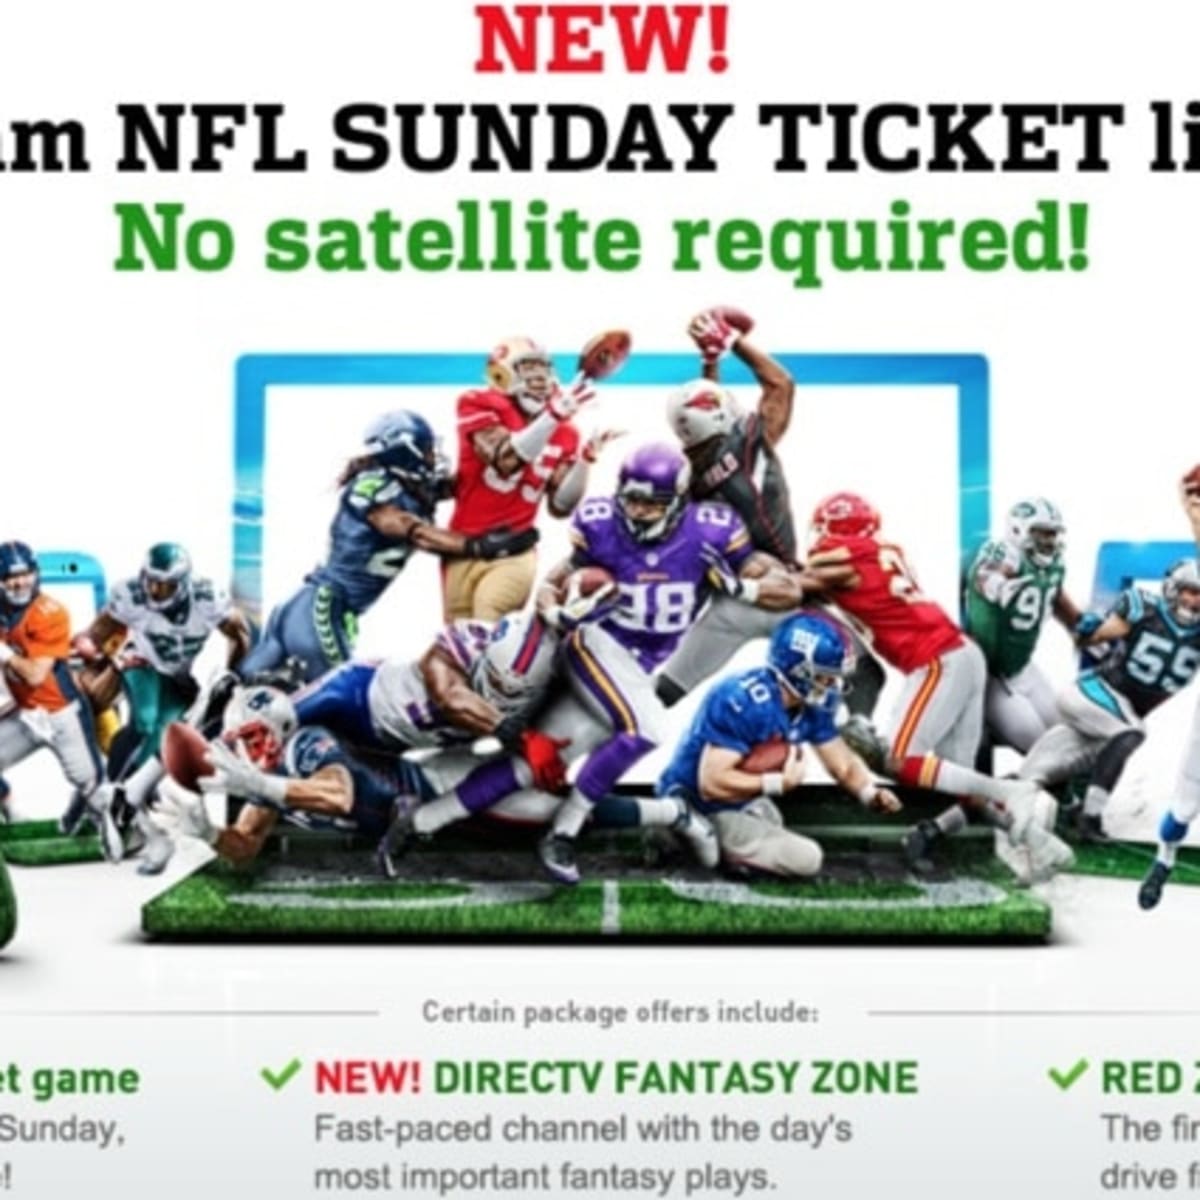 DirecTV may soon offer NFL Sunday Ticket to non-DirecTV subscribers